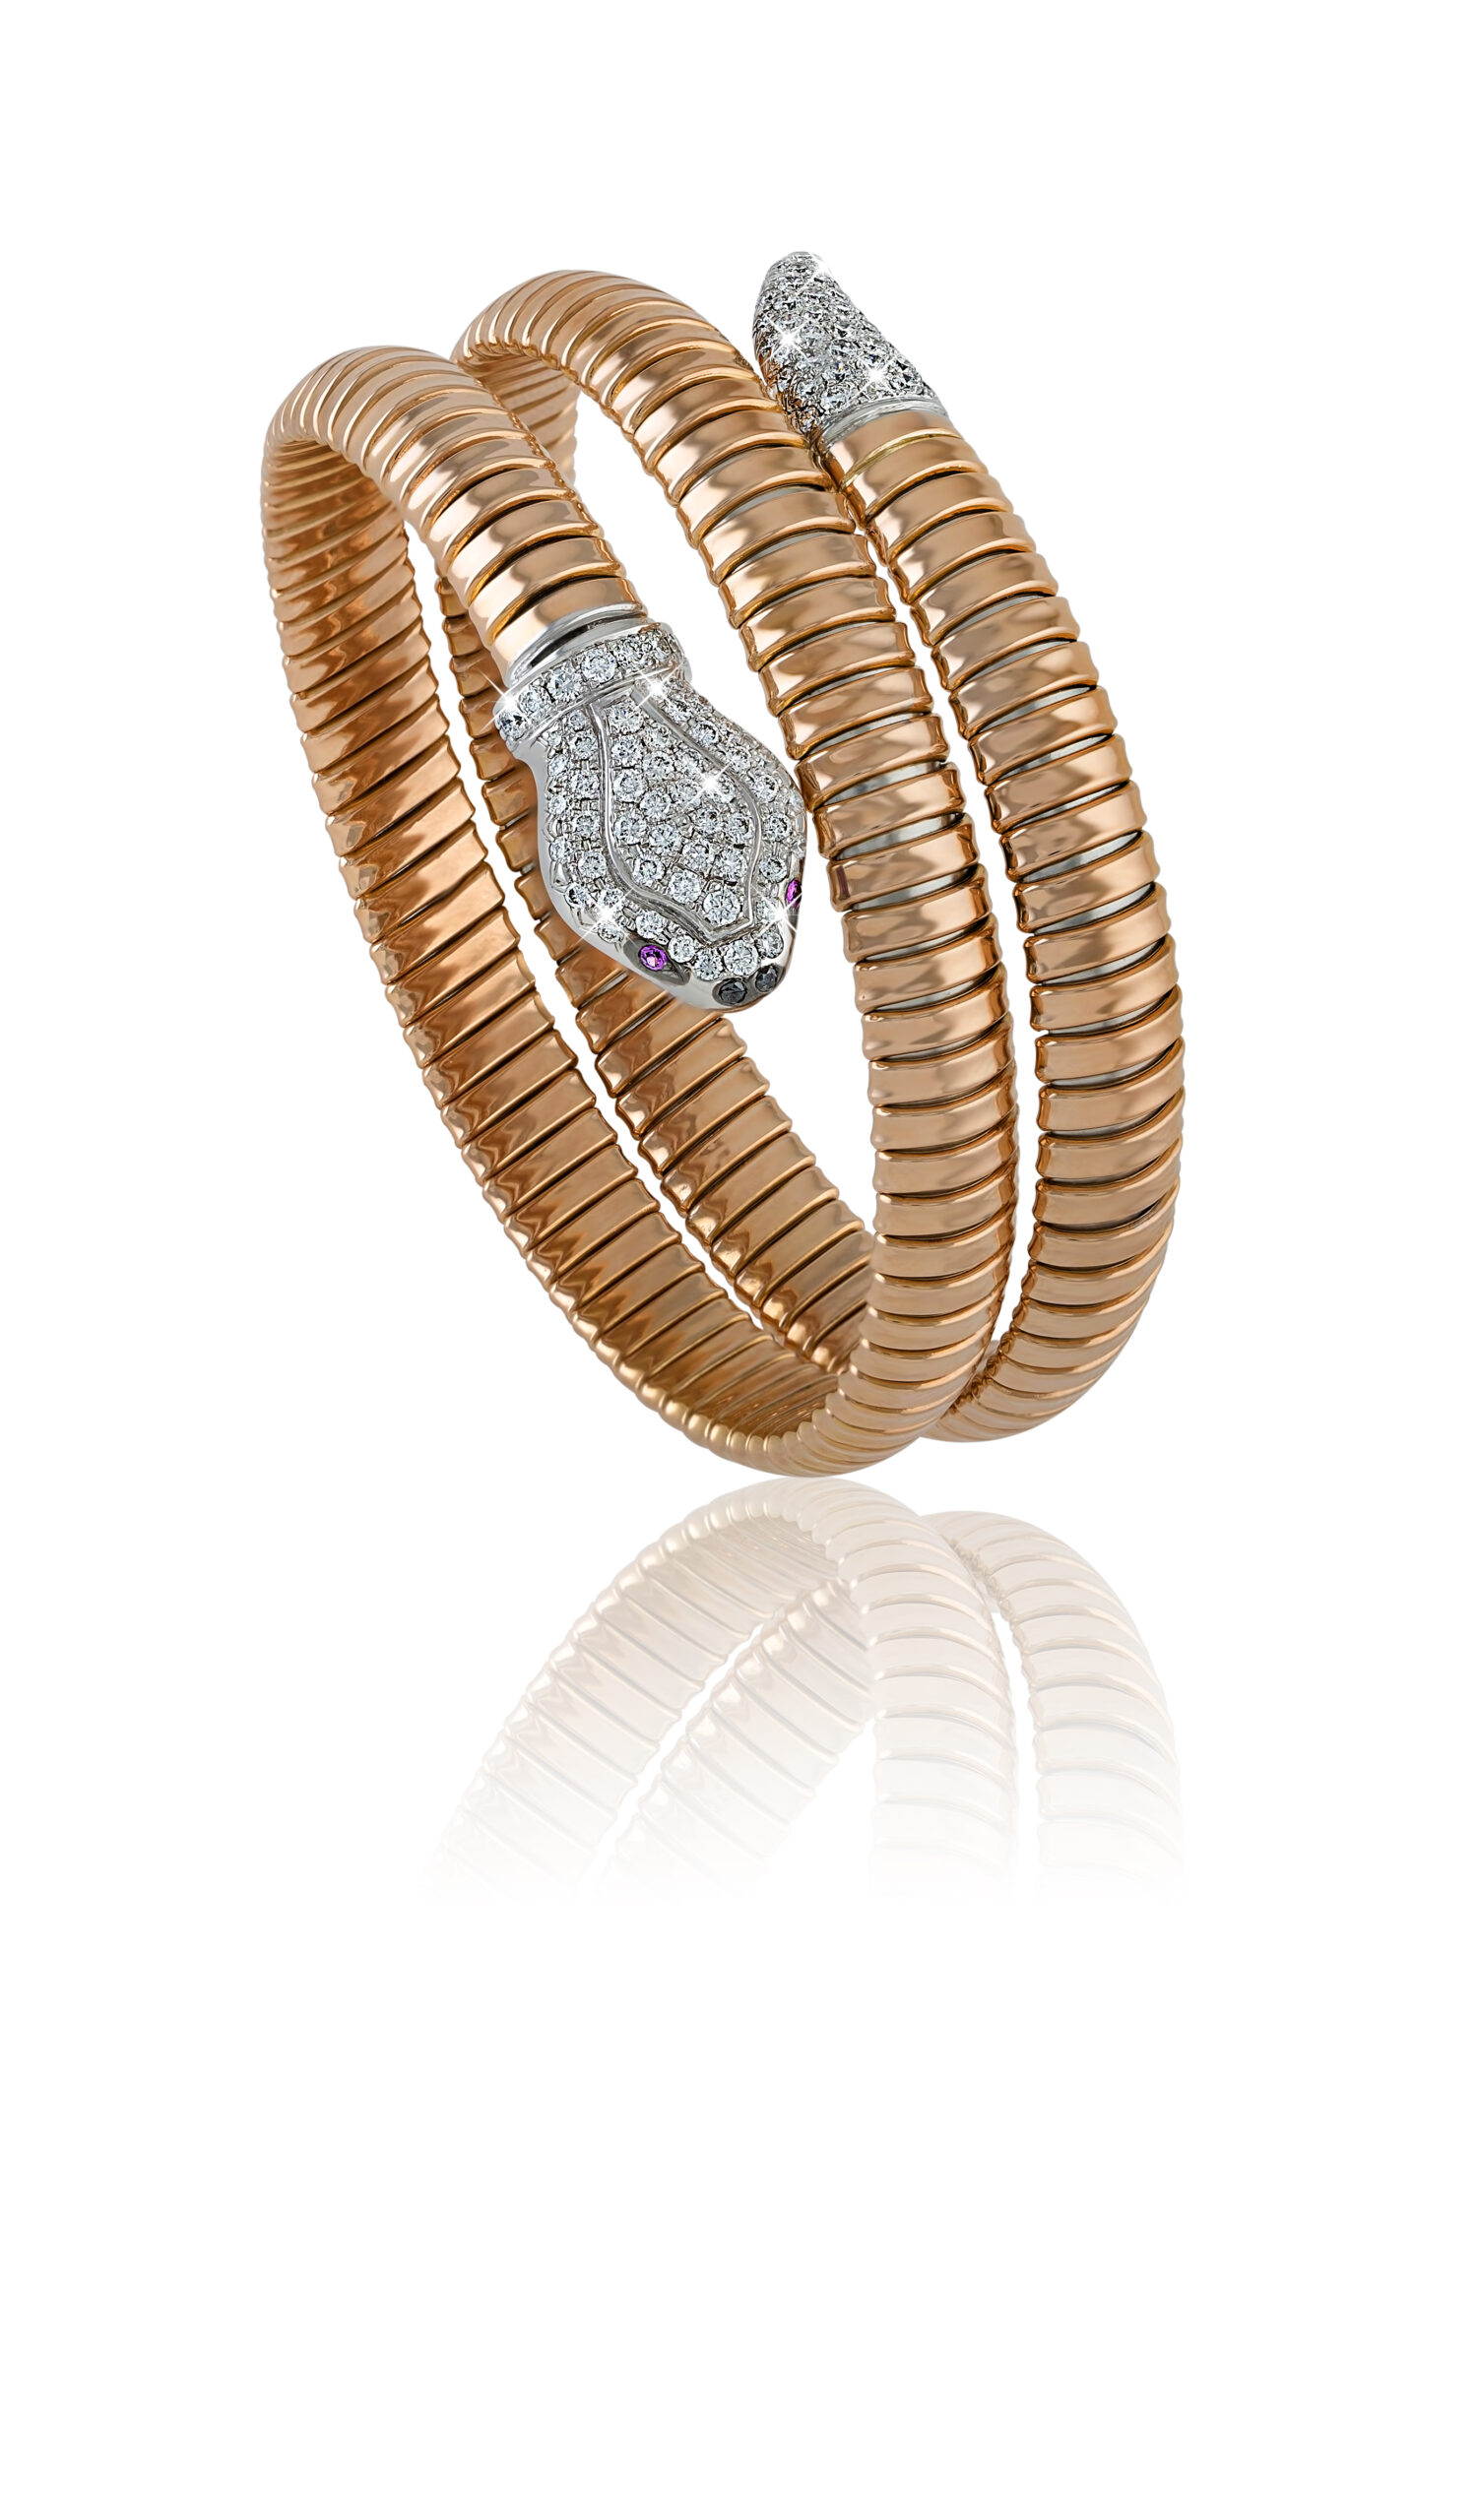 Tessitore Snake Bangle is handcrafted using the unique Tubogas Technology AED 24000 scaled